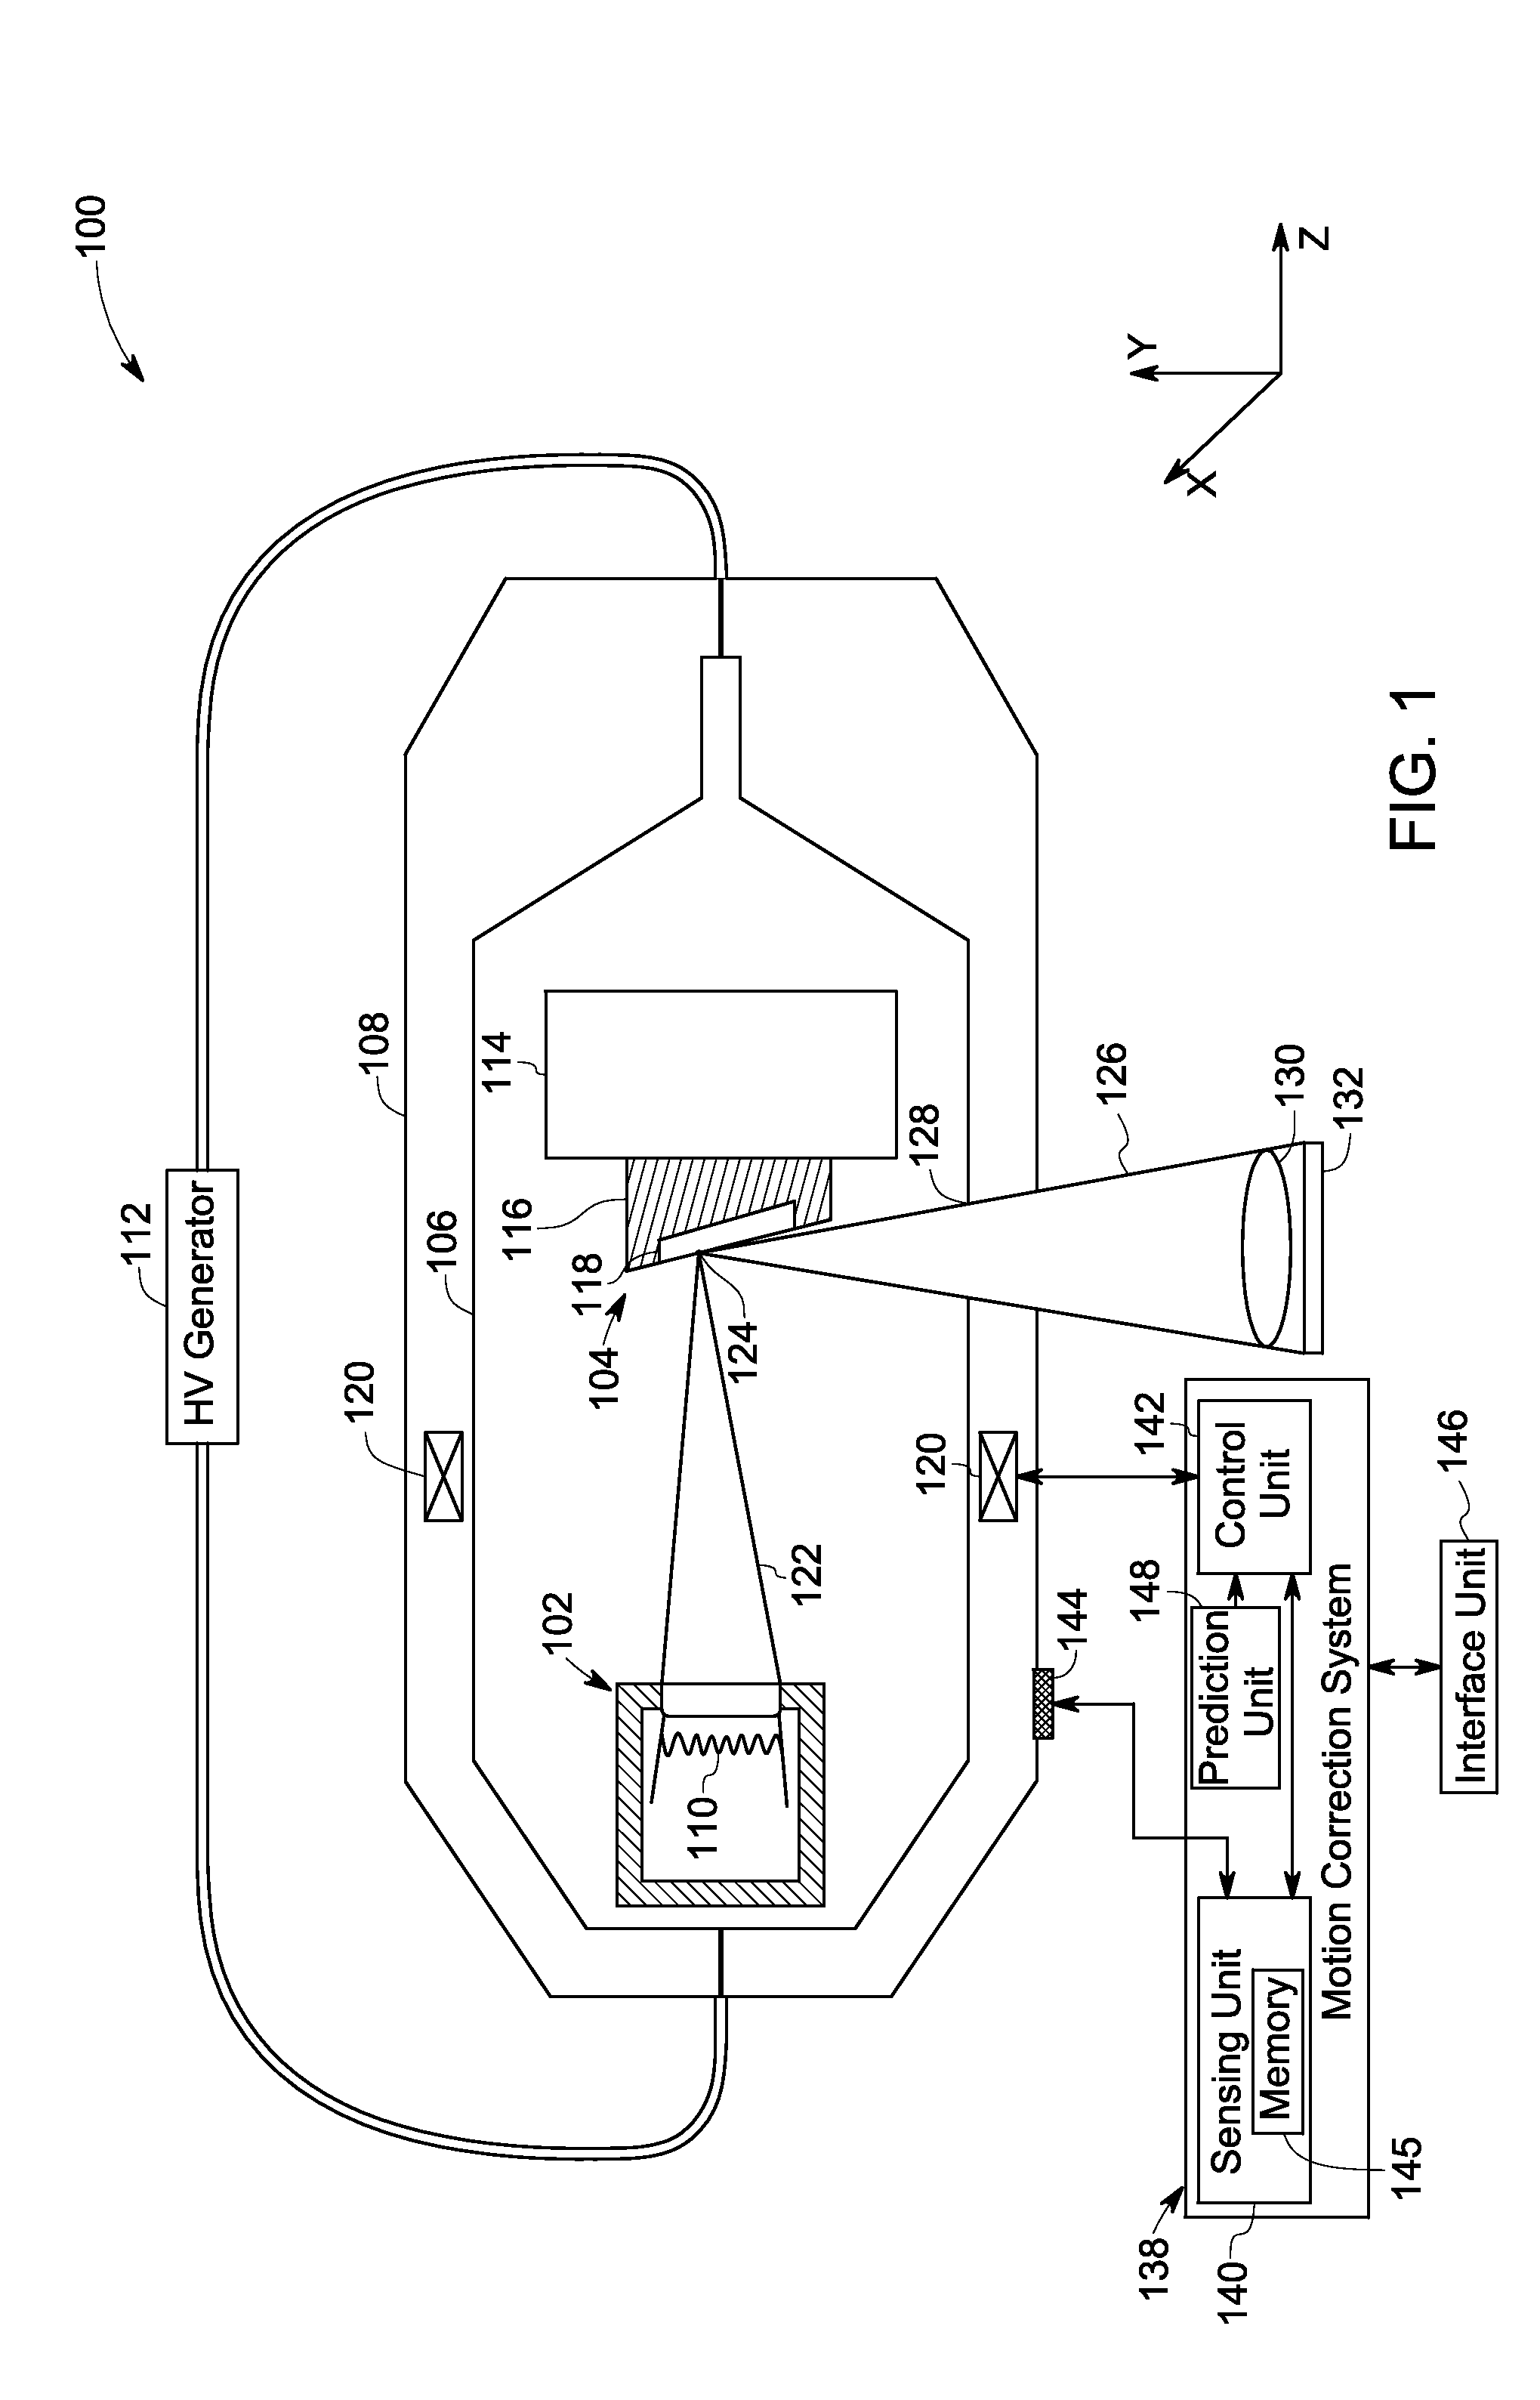 Motion correction system and method for an x-ray tube